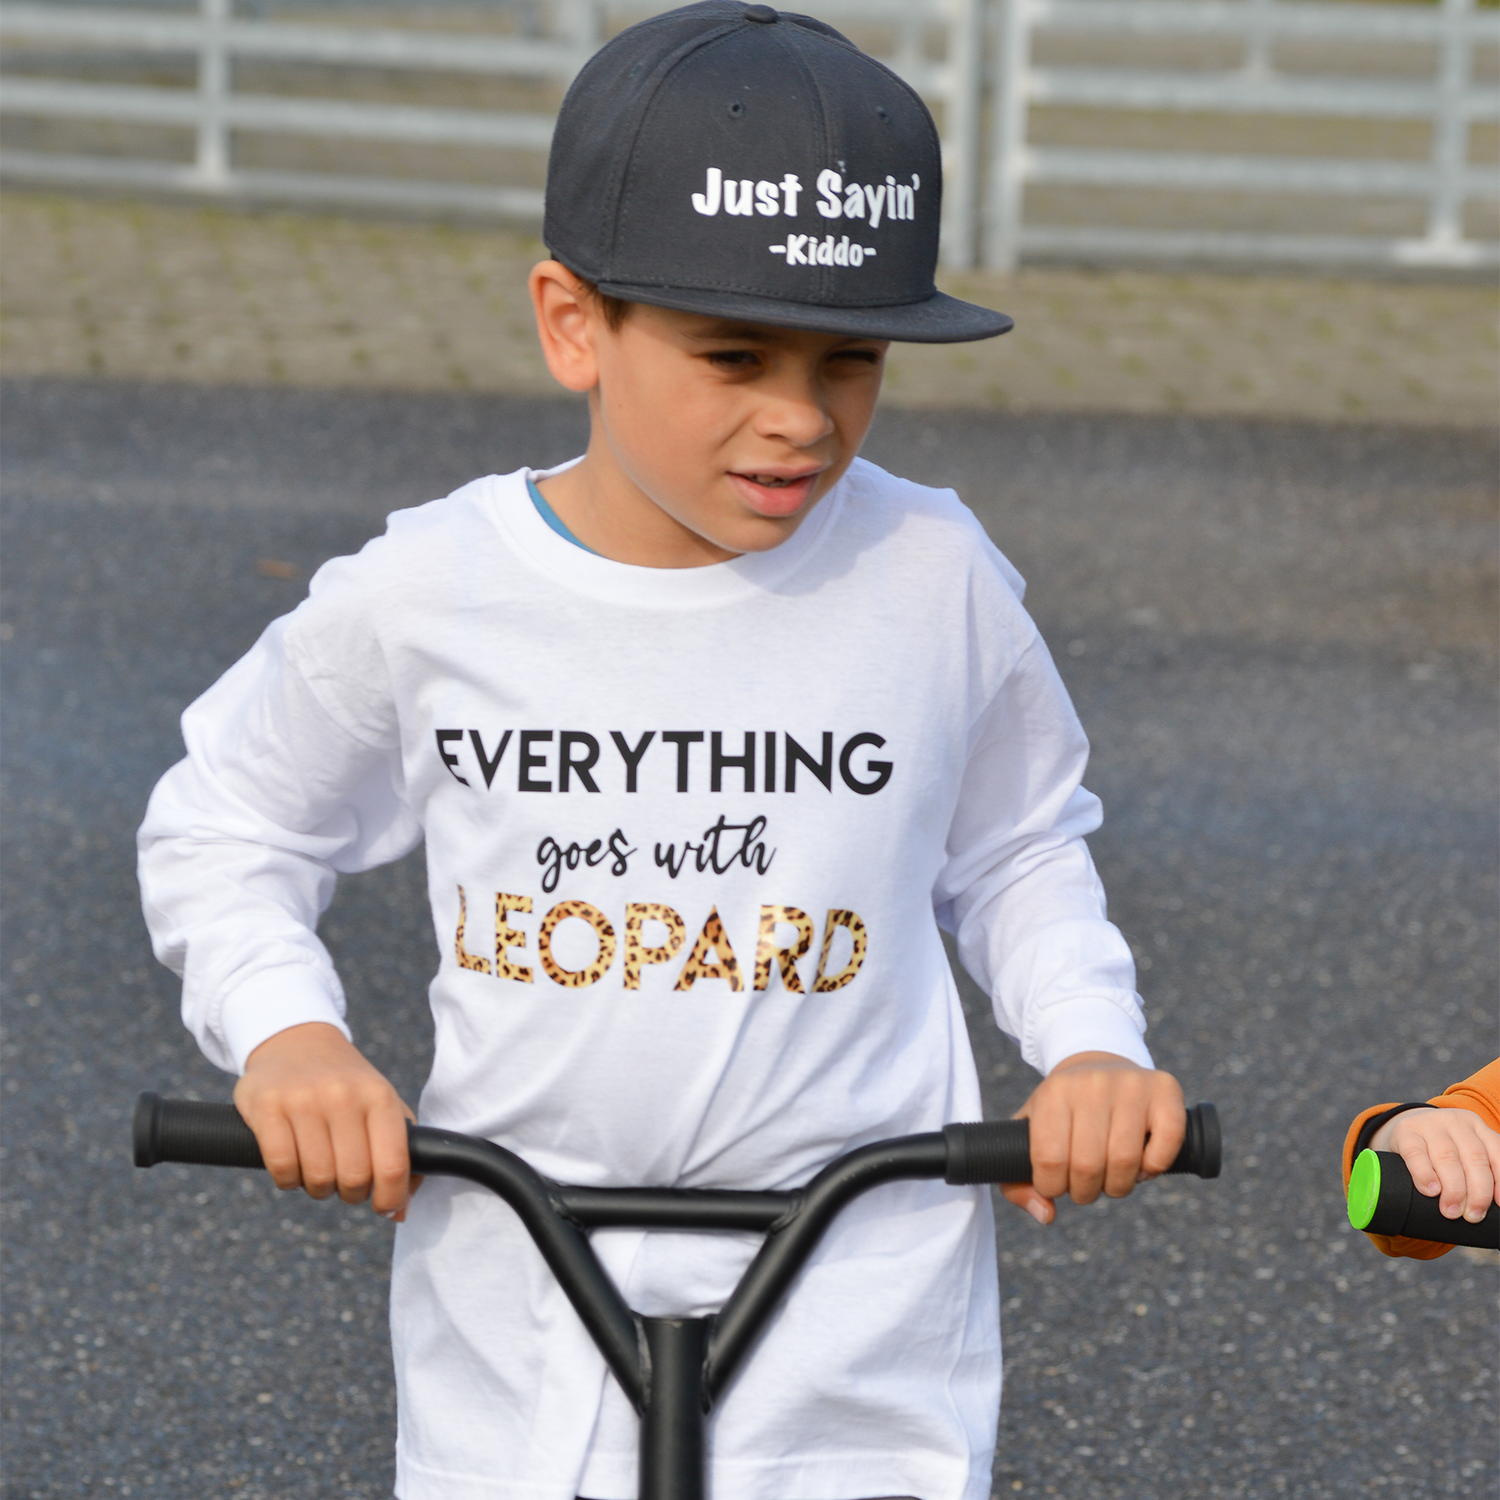 'Everything goes with leopard' kids longsleeve shirt